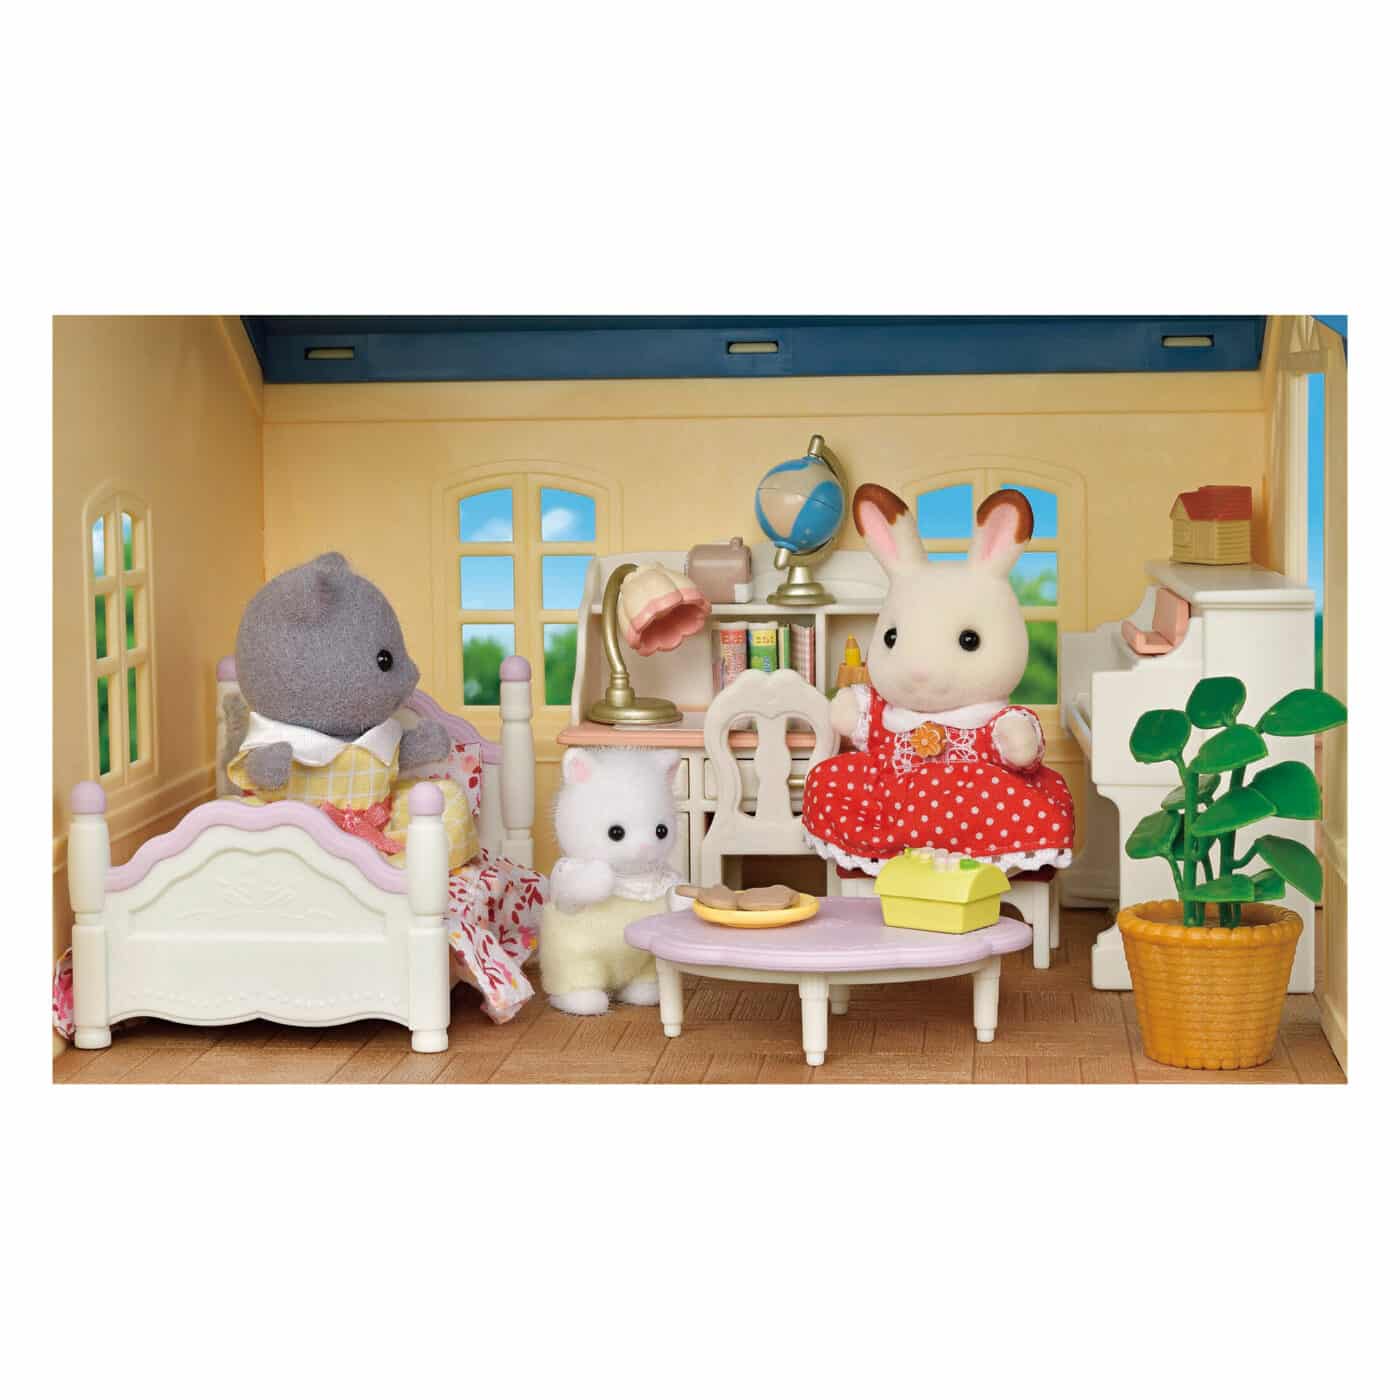 Sylvanian Families - Large House with Carpet Gift Set SF5669